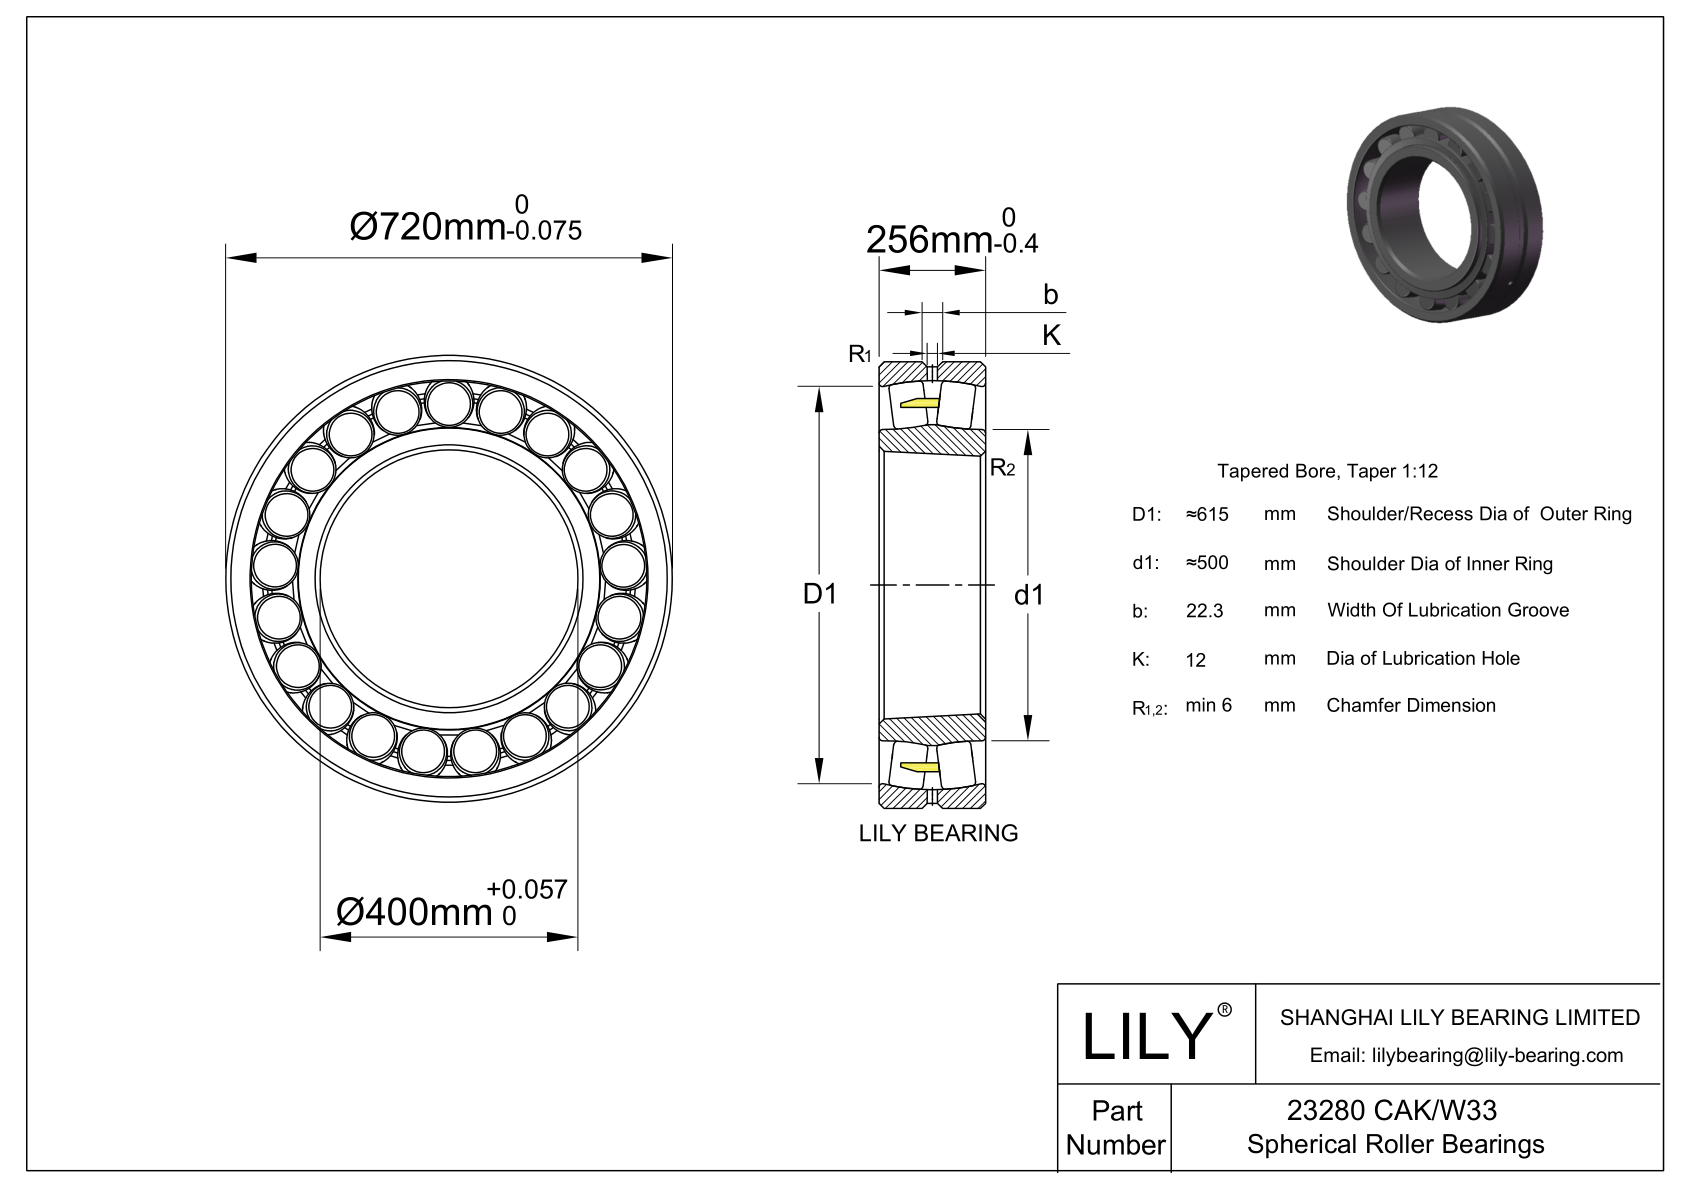 23280 CAK/W33 Double Row Spherical Roller Bearing cad drawing